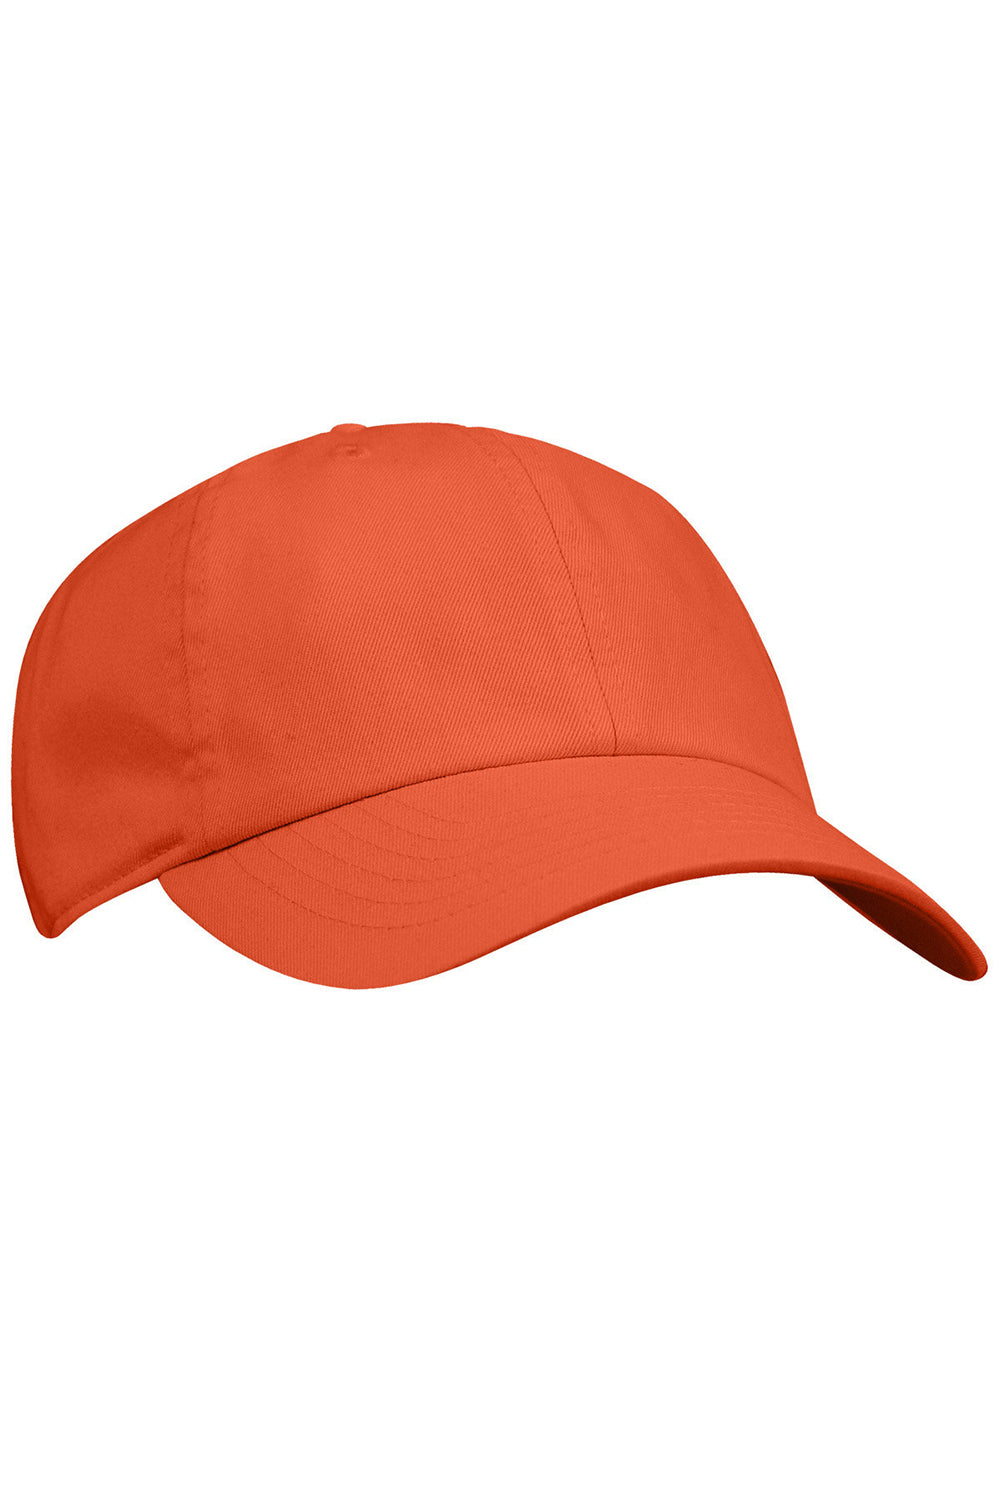 Champion CA2000 Mens Classic Washed Twill Hat Orange Front